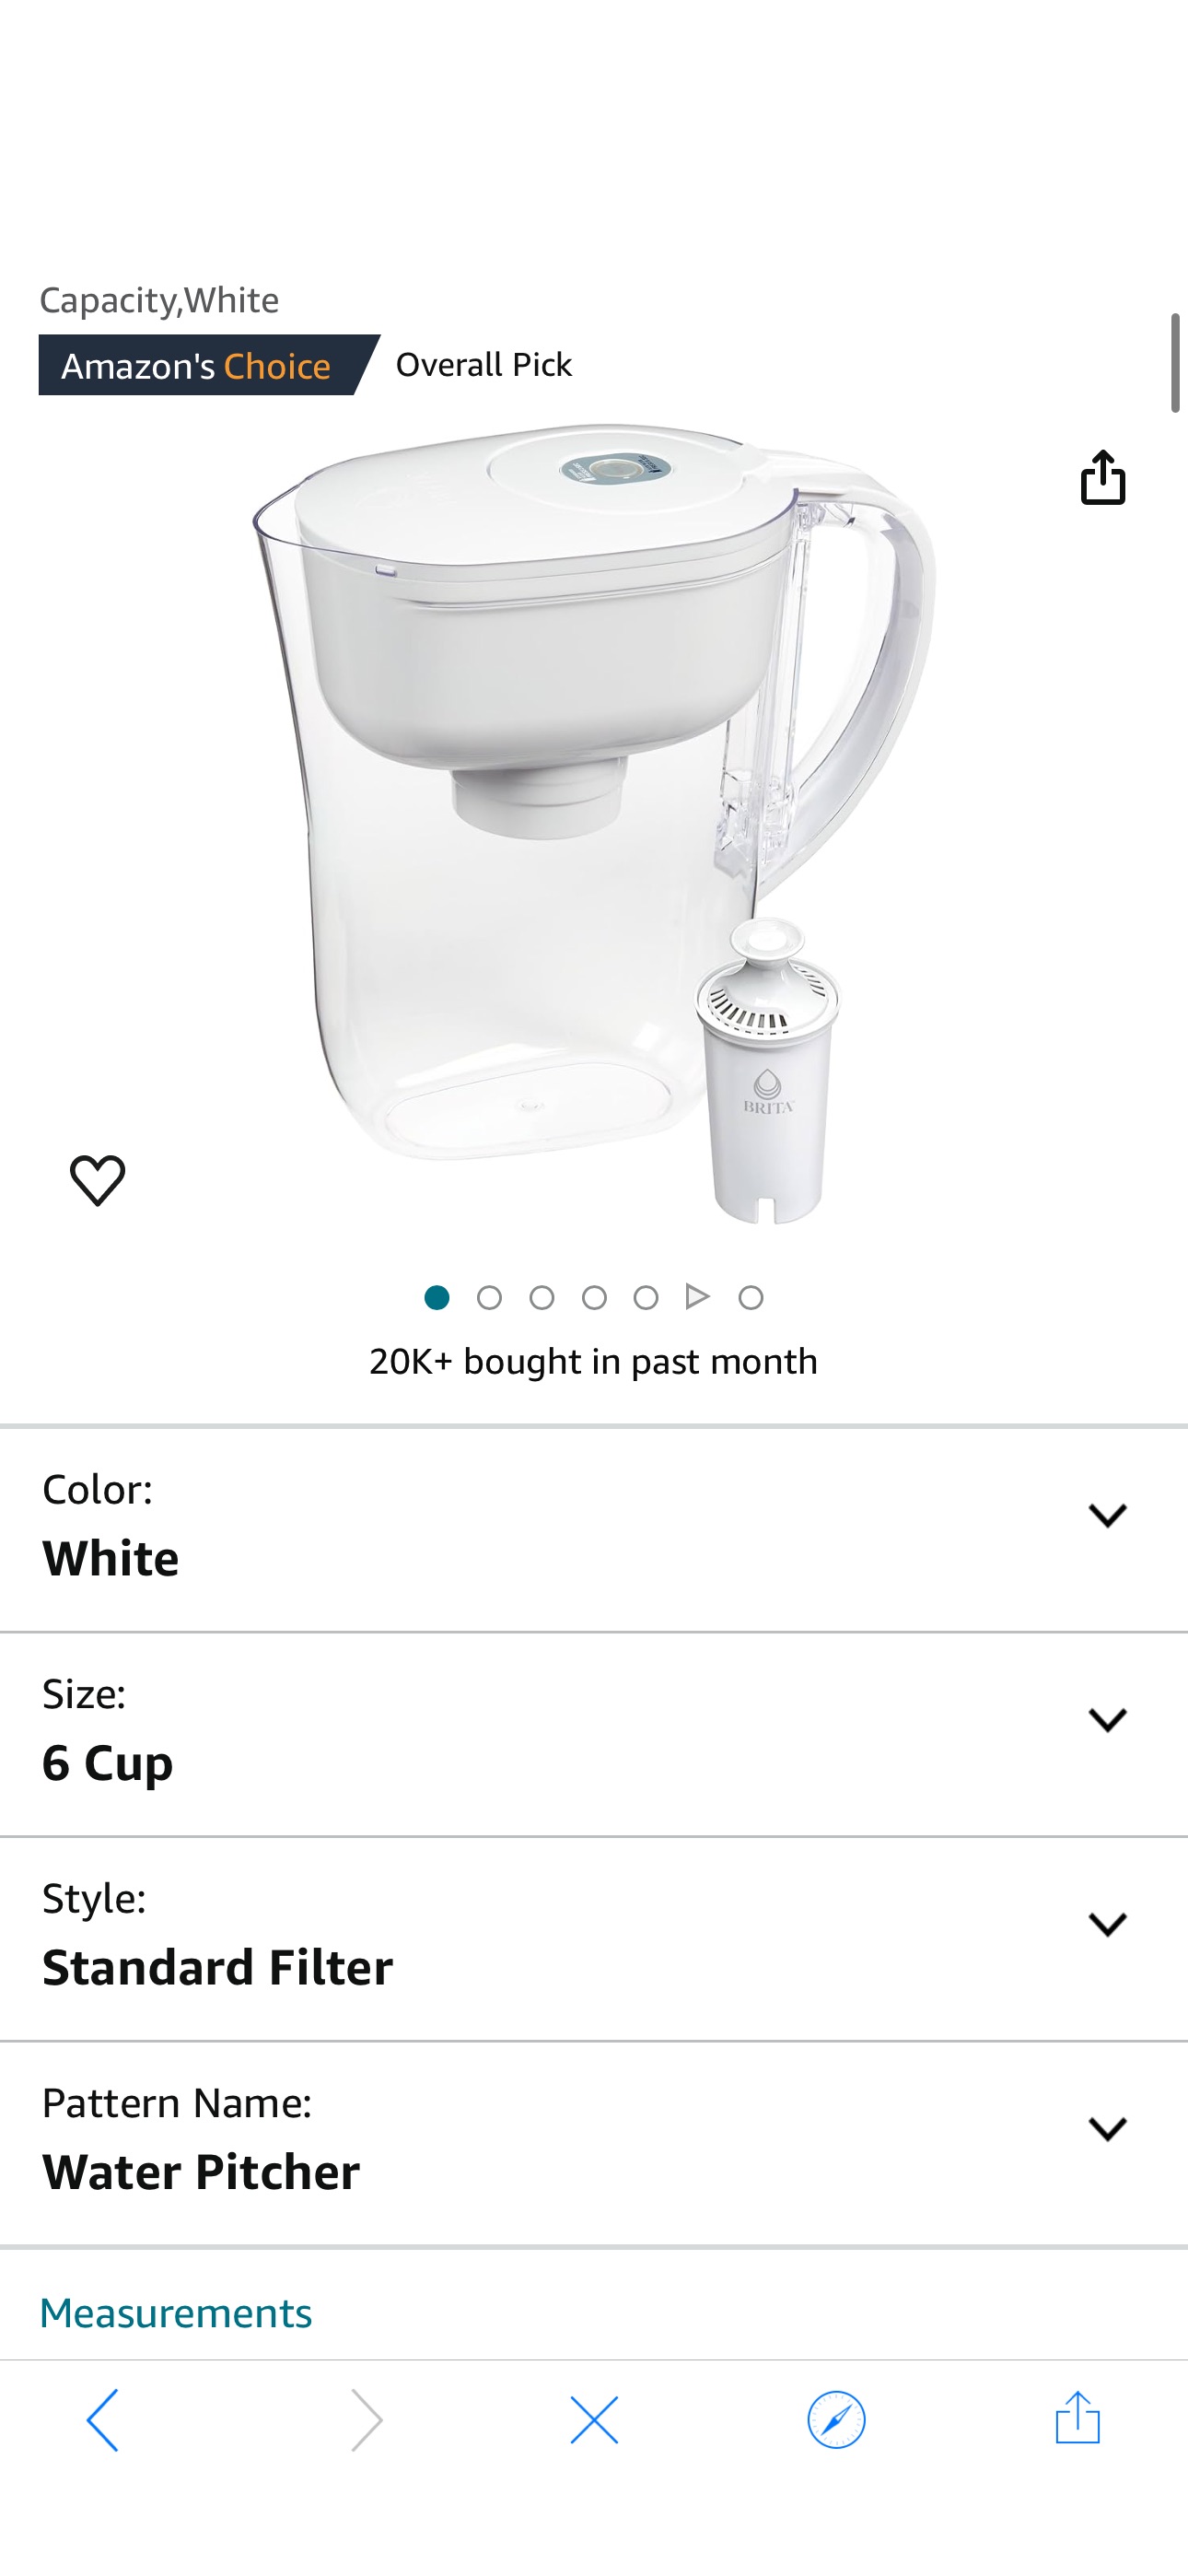 Amazon.com: Brita Metro Water Filter Pitcher, BPA-Free Water Pitcher, Replaces 1,800 Plastic Water Bottles a Year, Lasts Two Months or 40 Gallons,Includes 1 Filter,Kitchen Accessories, Small -6-Cup Ca